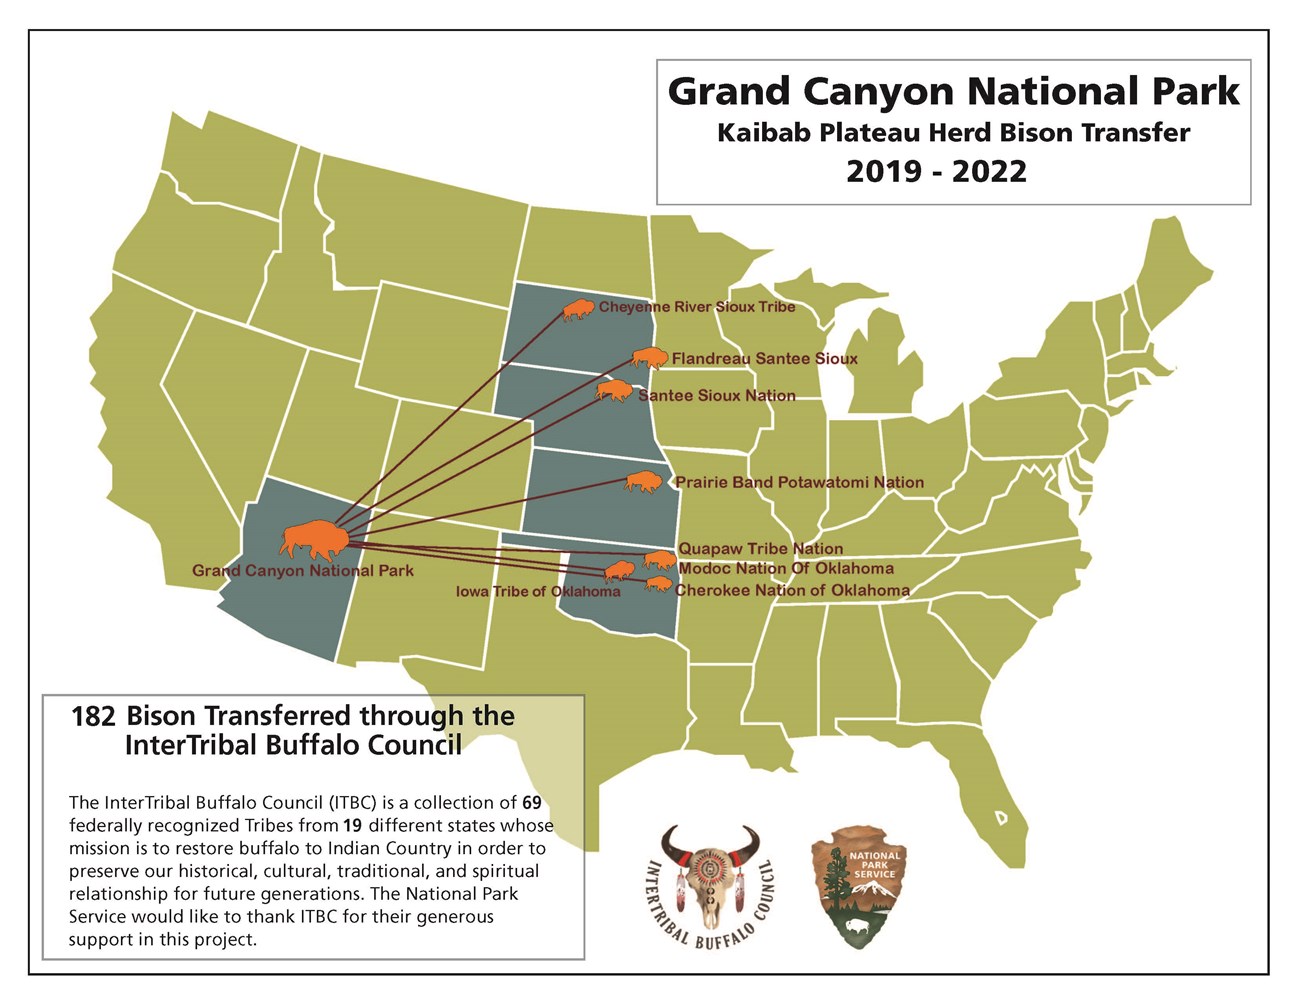 A map showing where Grand Canyon bison have been relocated to, including 8 different Native American tribes throughout the Great Plains States